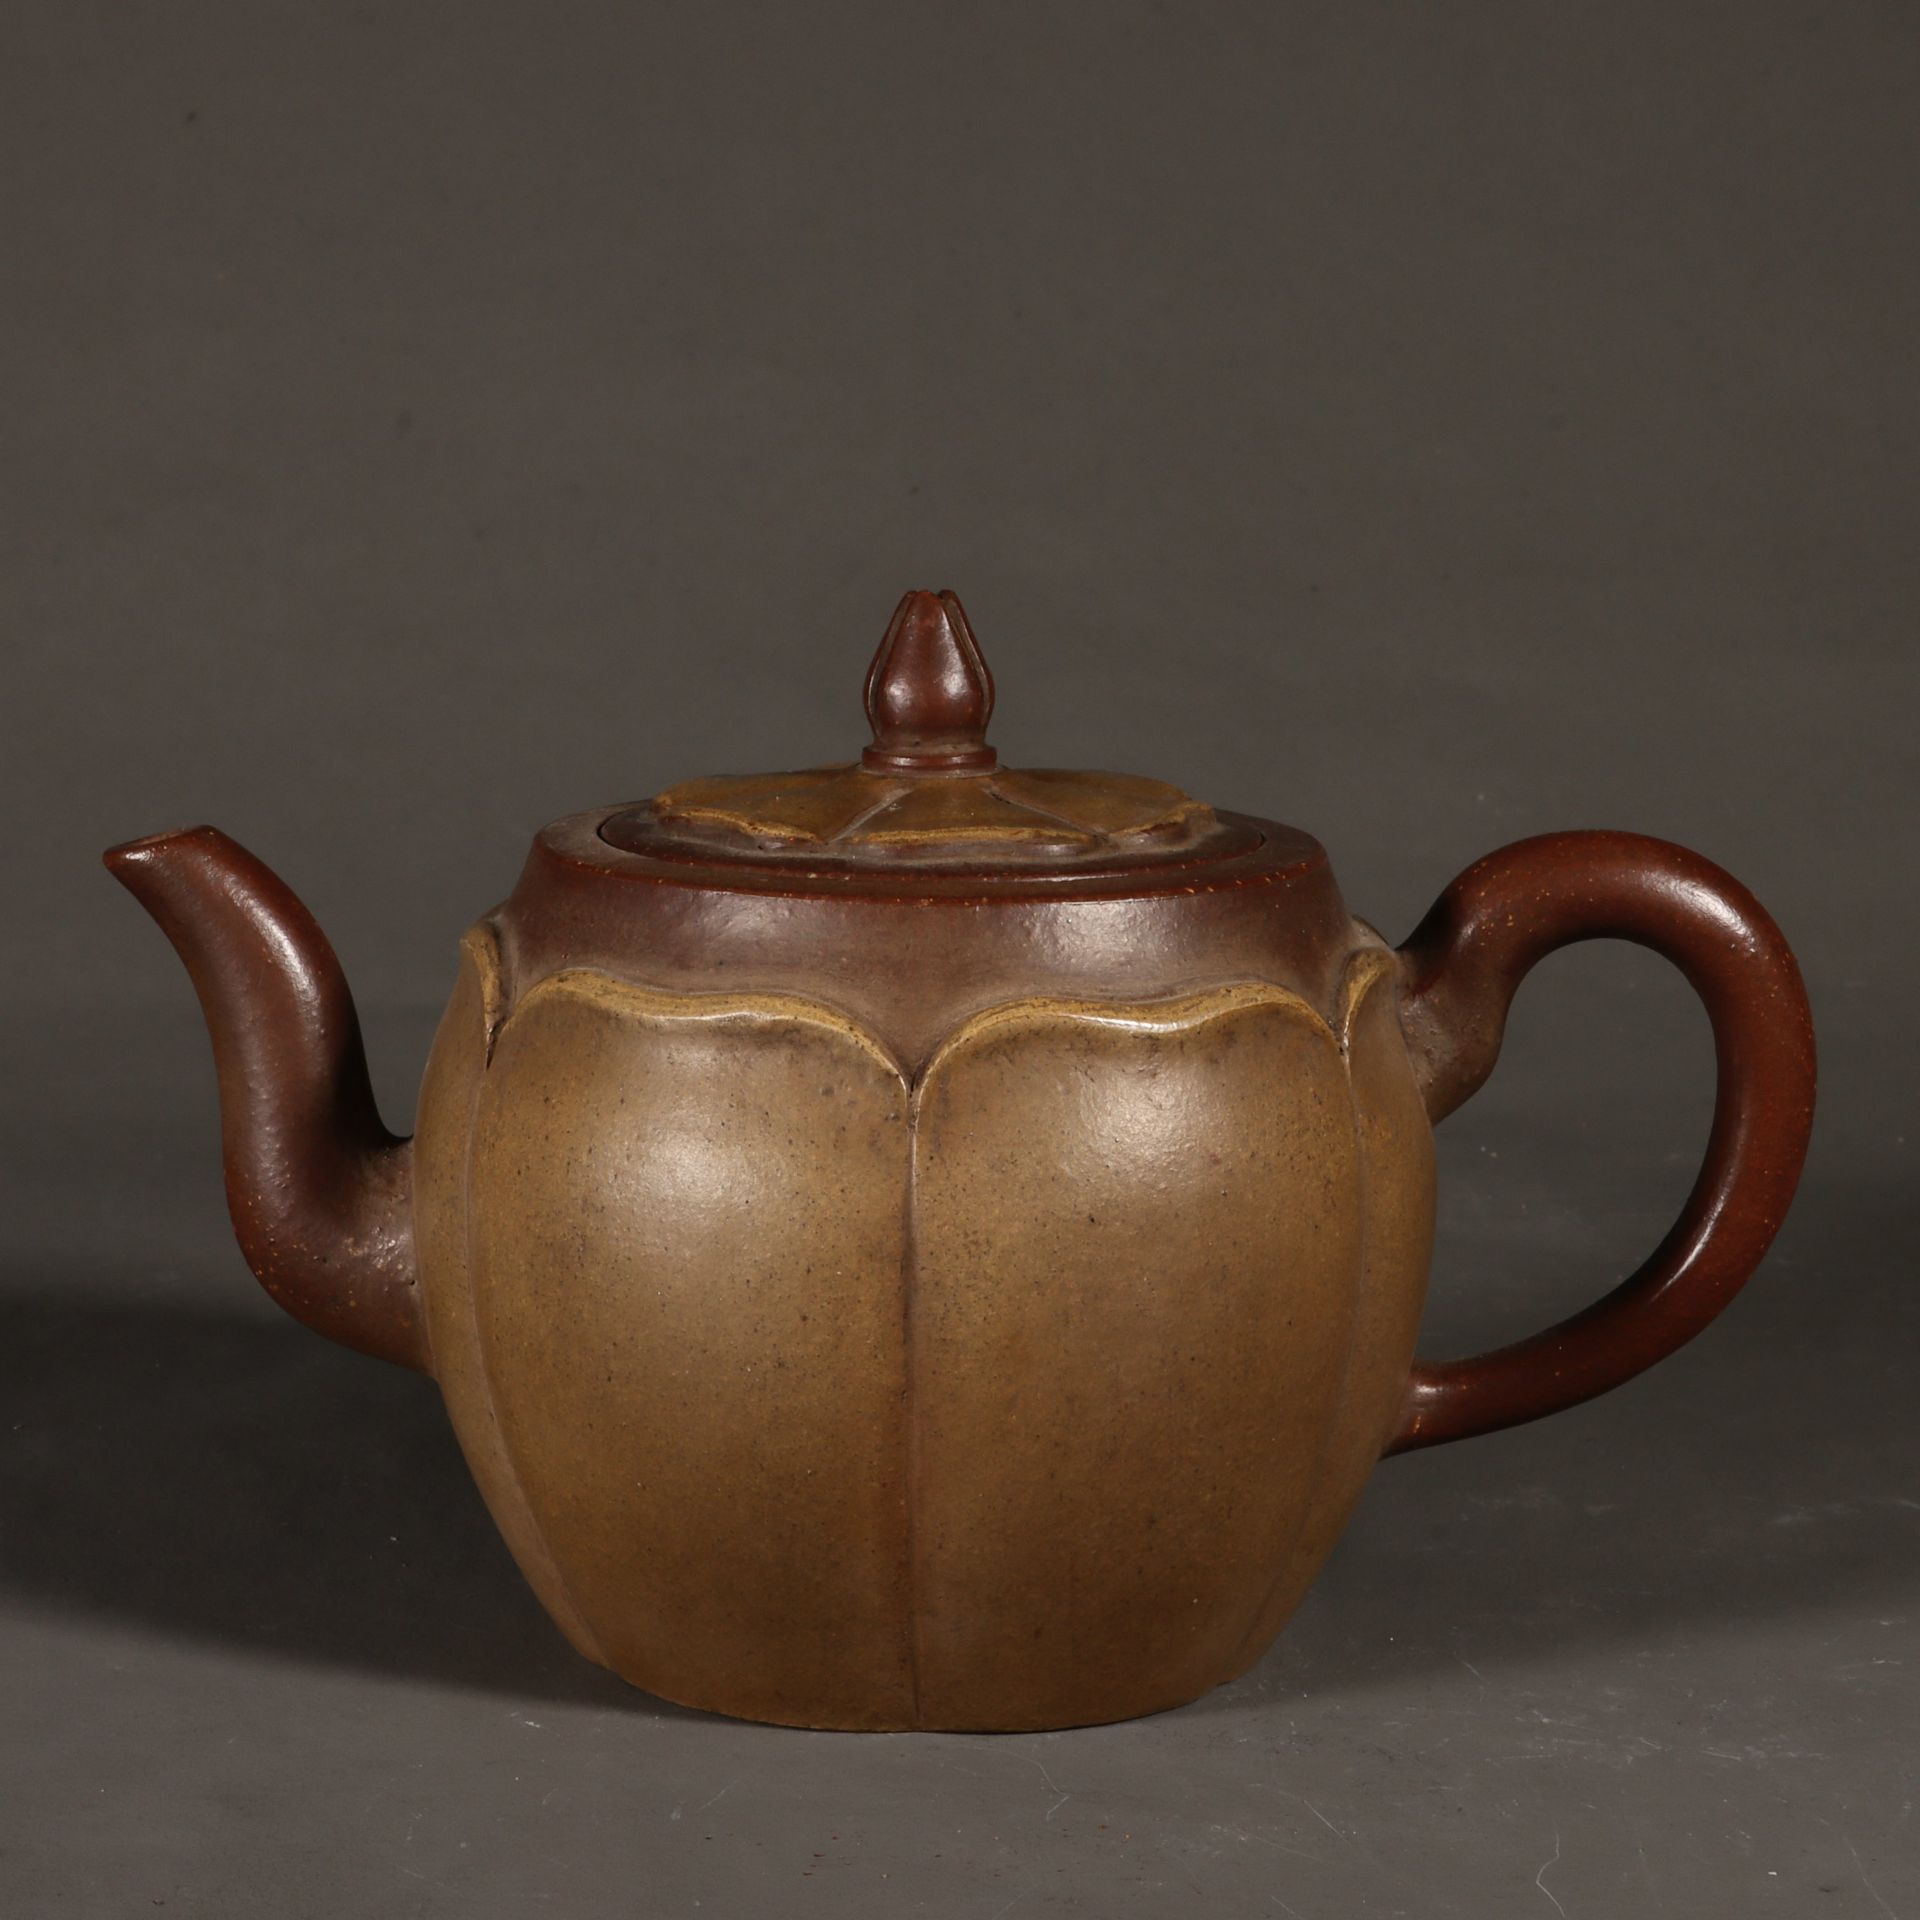 Purple clay pot from the Qing Dynasty - Image 2 of 9